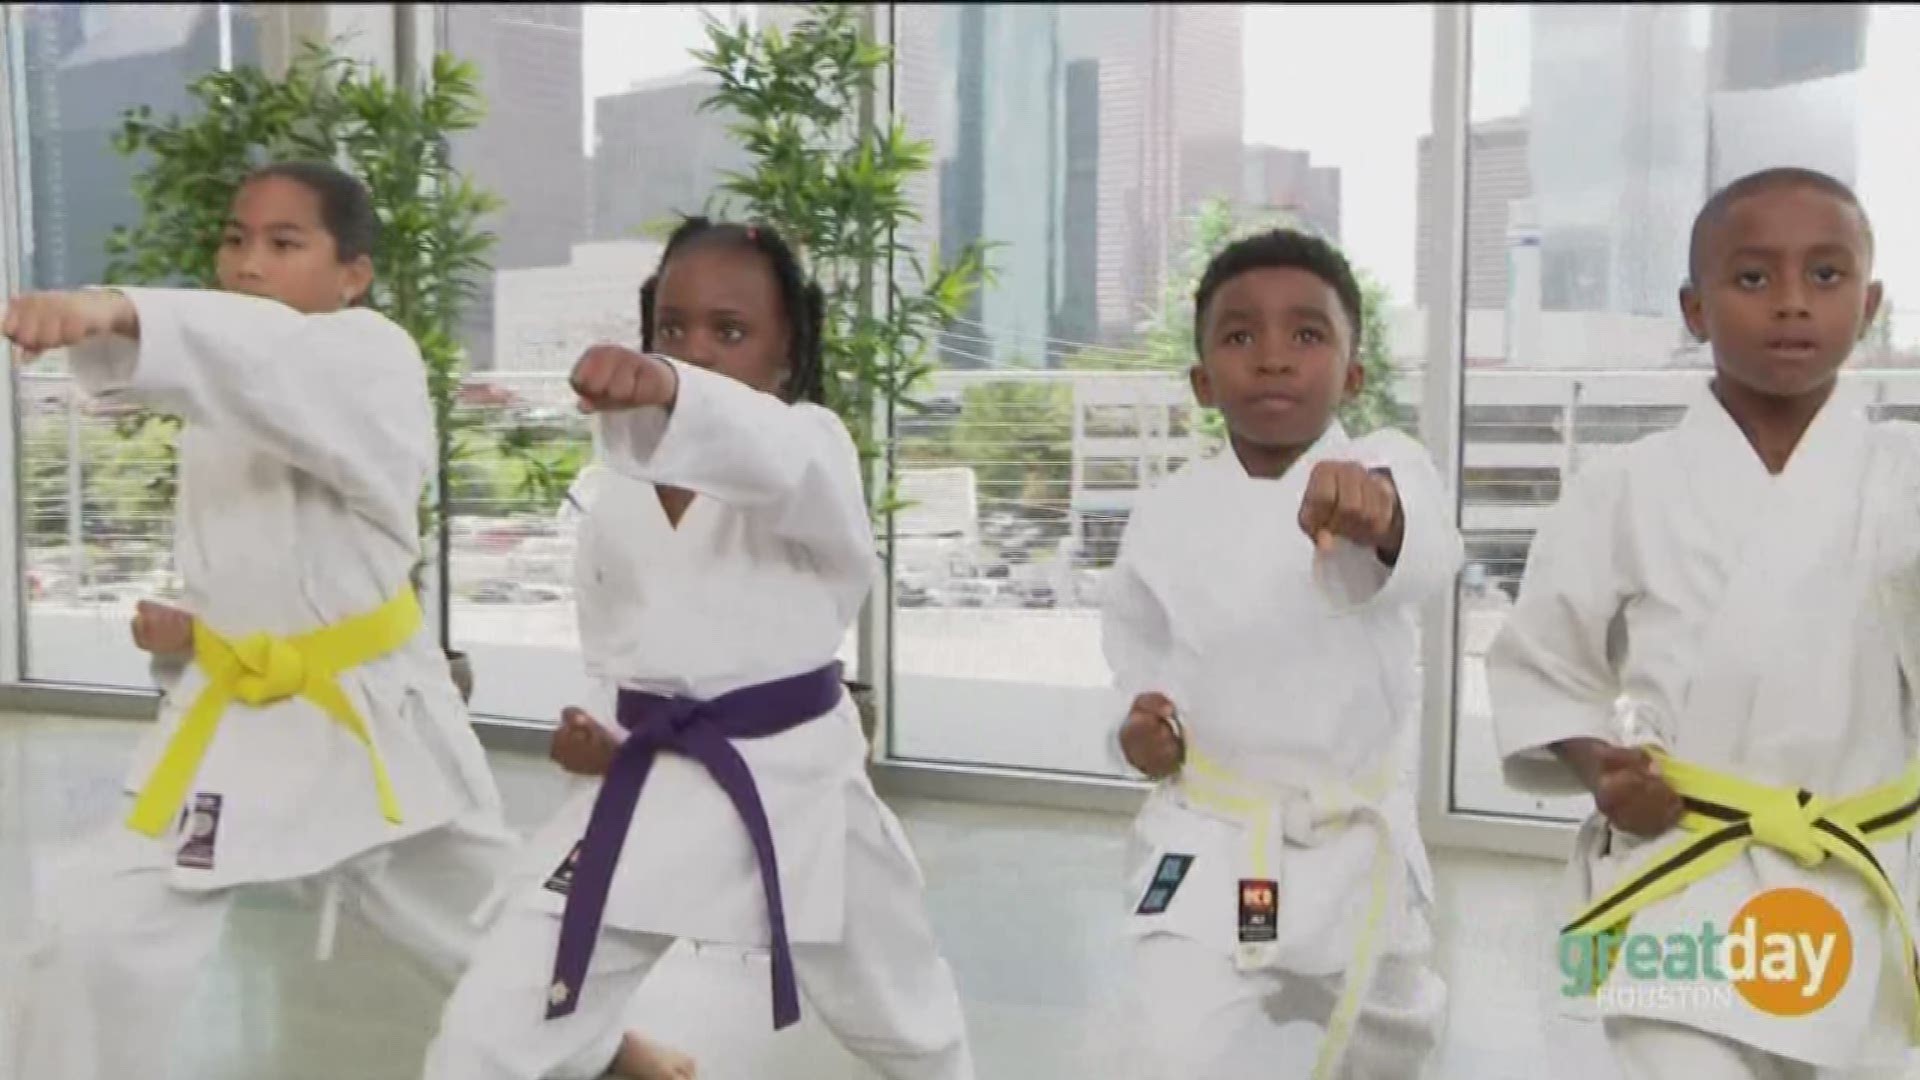 Martial Arts instructor, Khalil &amp; Sulei Johns, with MBody Martial Arts &amp; Fitness show how karate is beneficial for your kids.